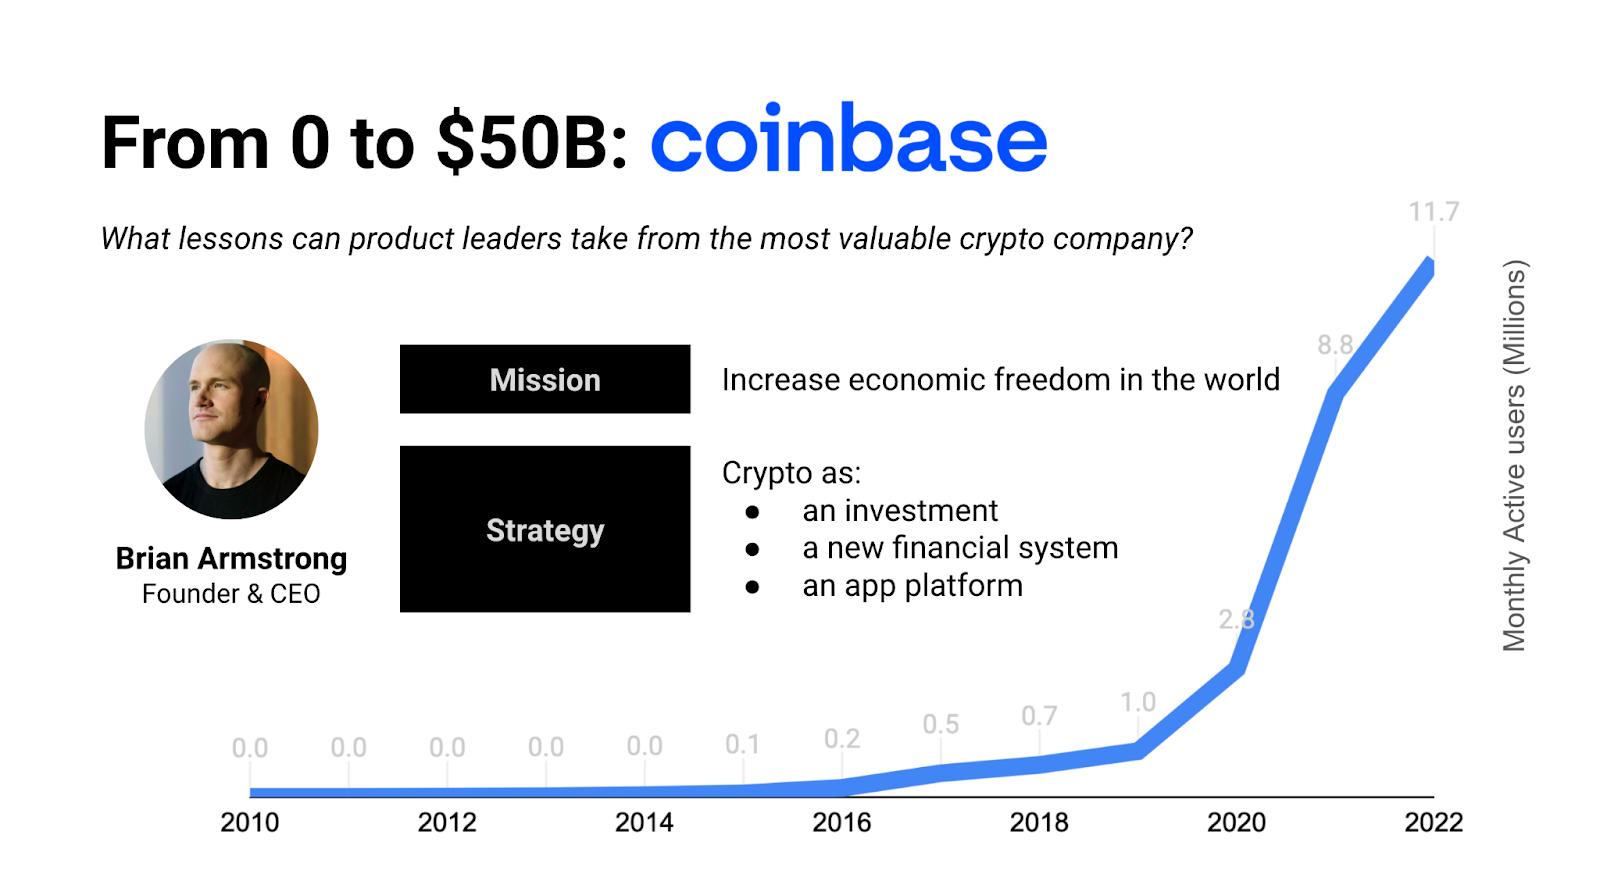 Coinbase Stock Surges After Strong Results but Legal Dangers